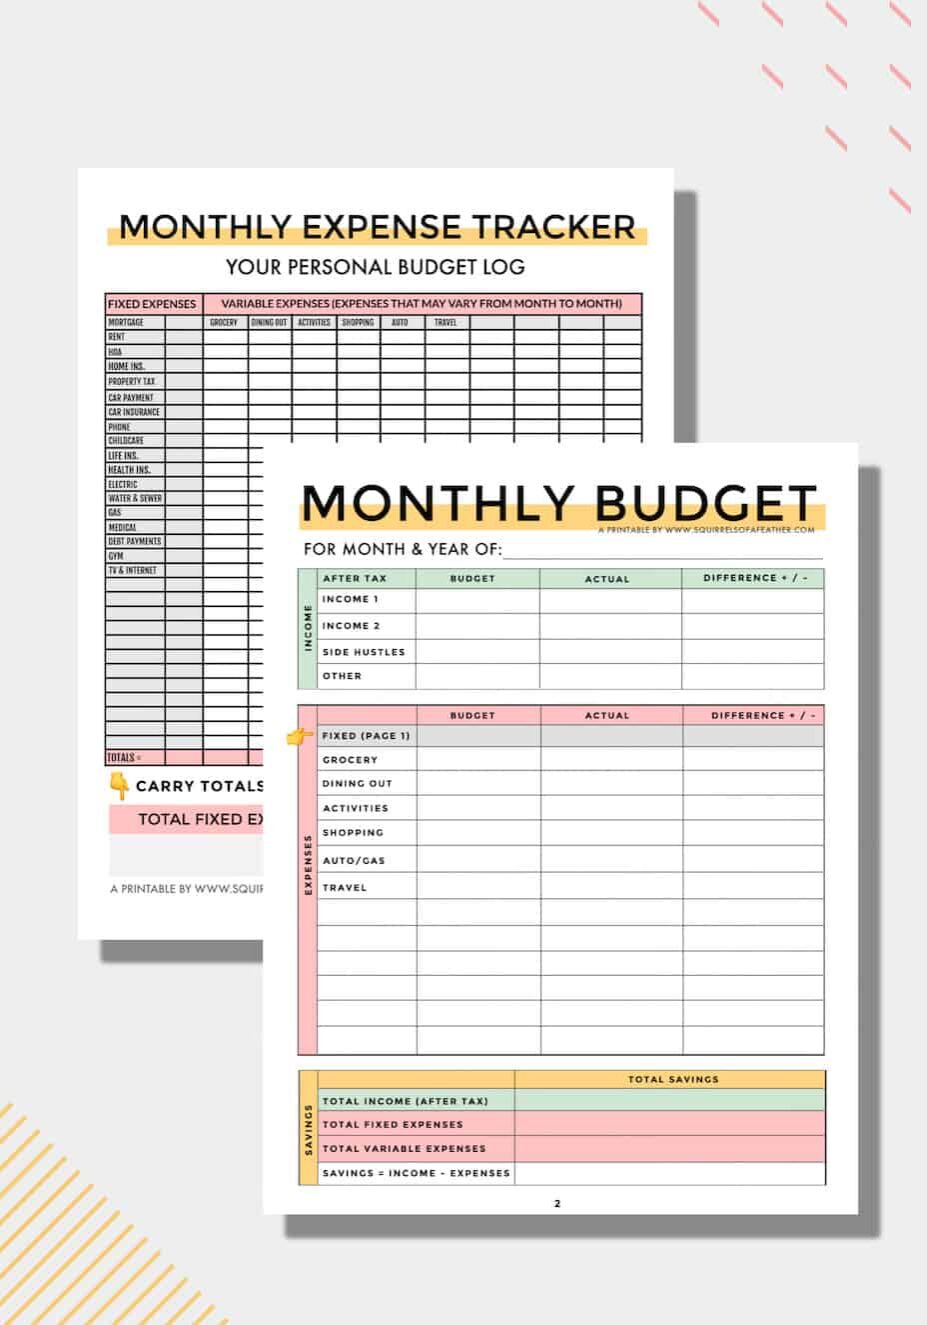 Complete FREE Budget Planner PDF